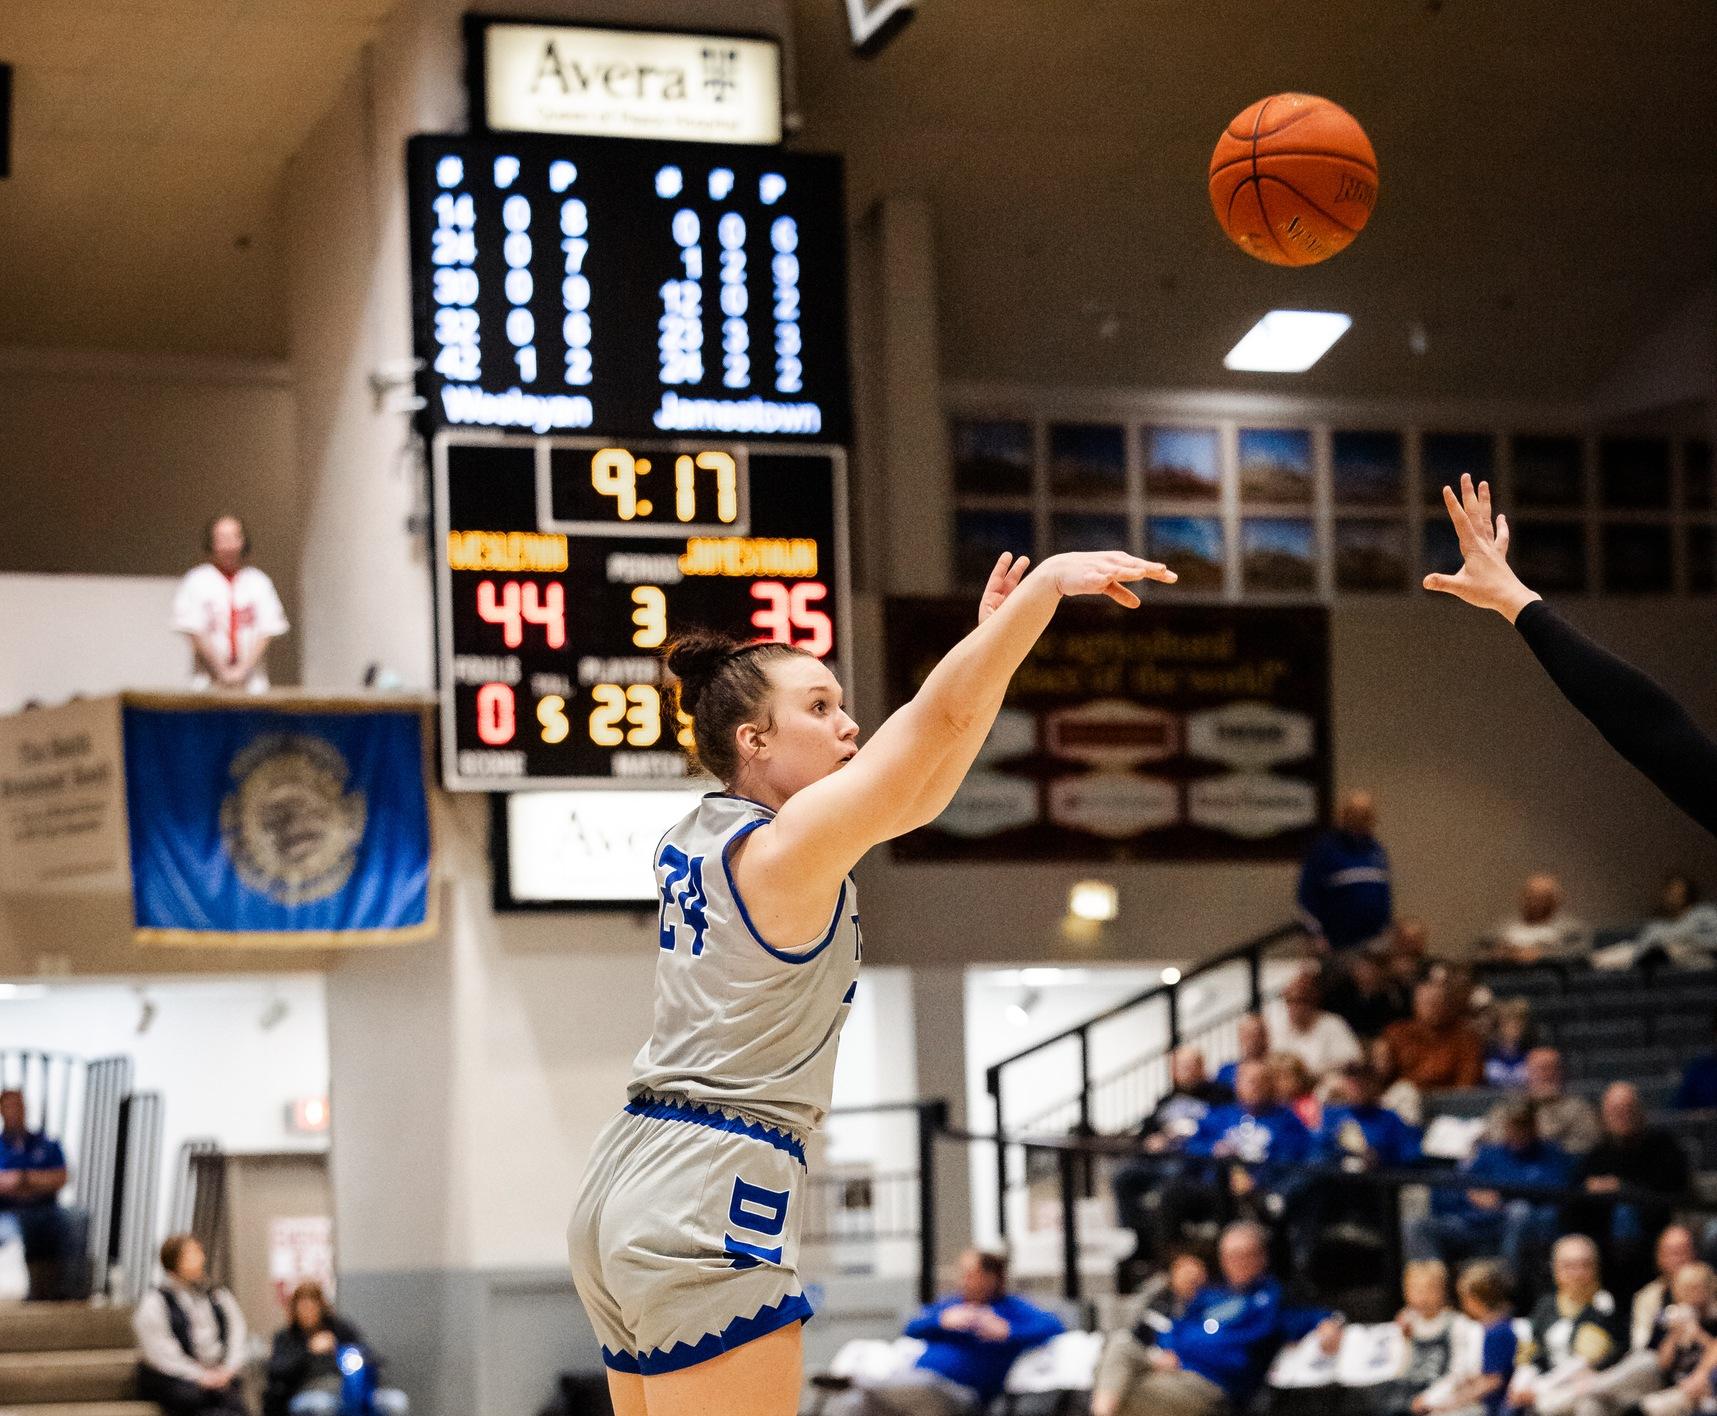 TIGERS PULL AWAY LATE BEHIND YOST 22 POINTS IN DWU 63-52 WIN OVER MIDLAND